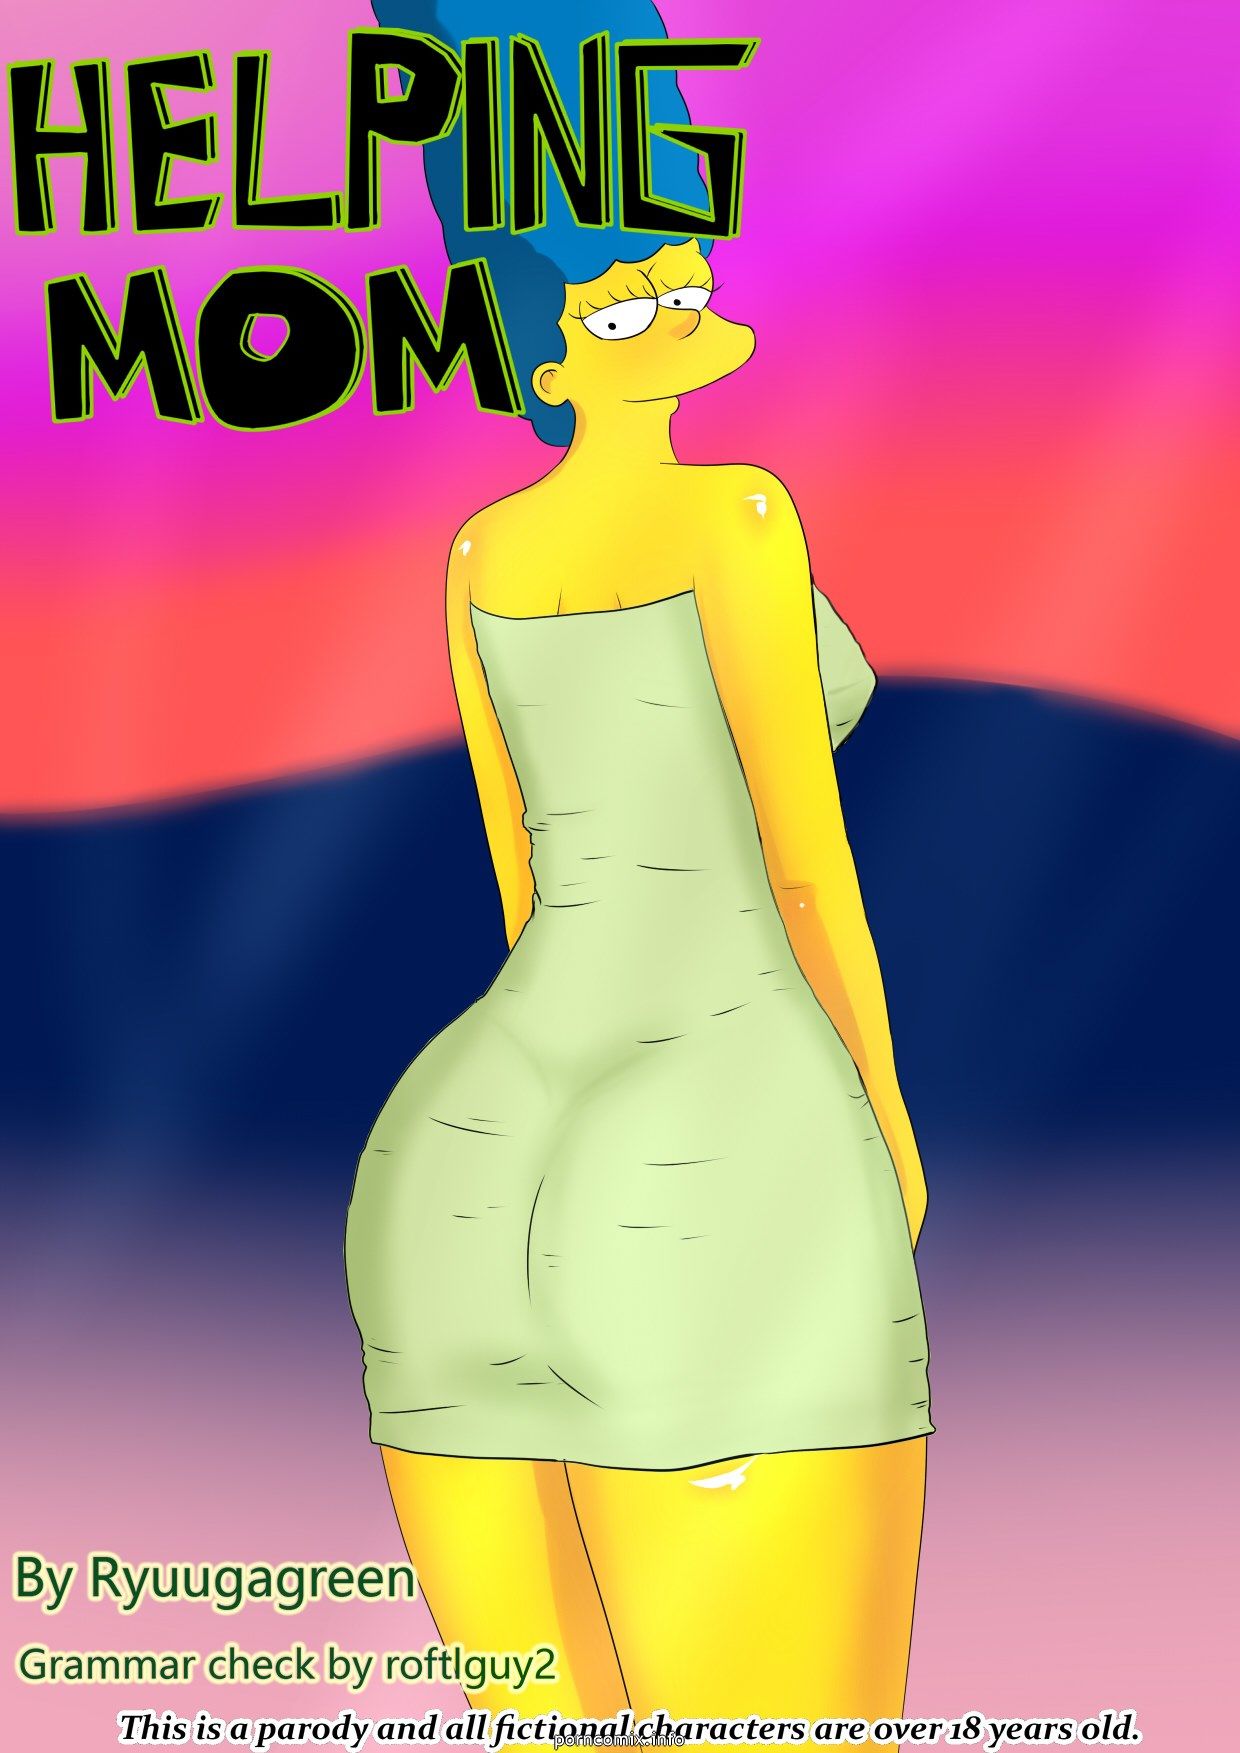 Simpsons - Helping Mom page 1